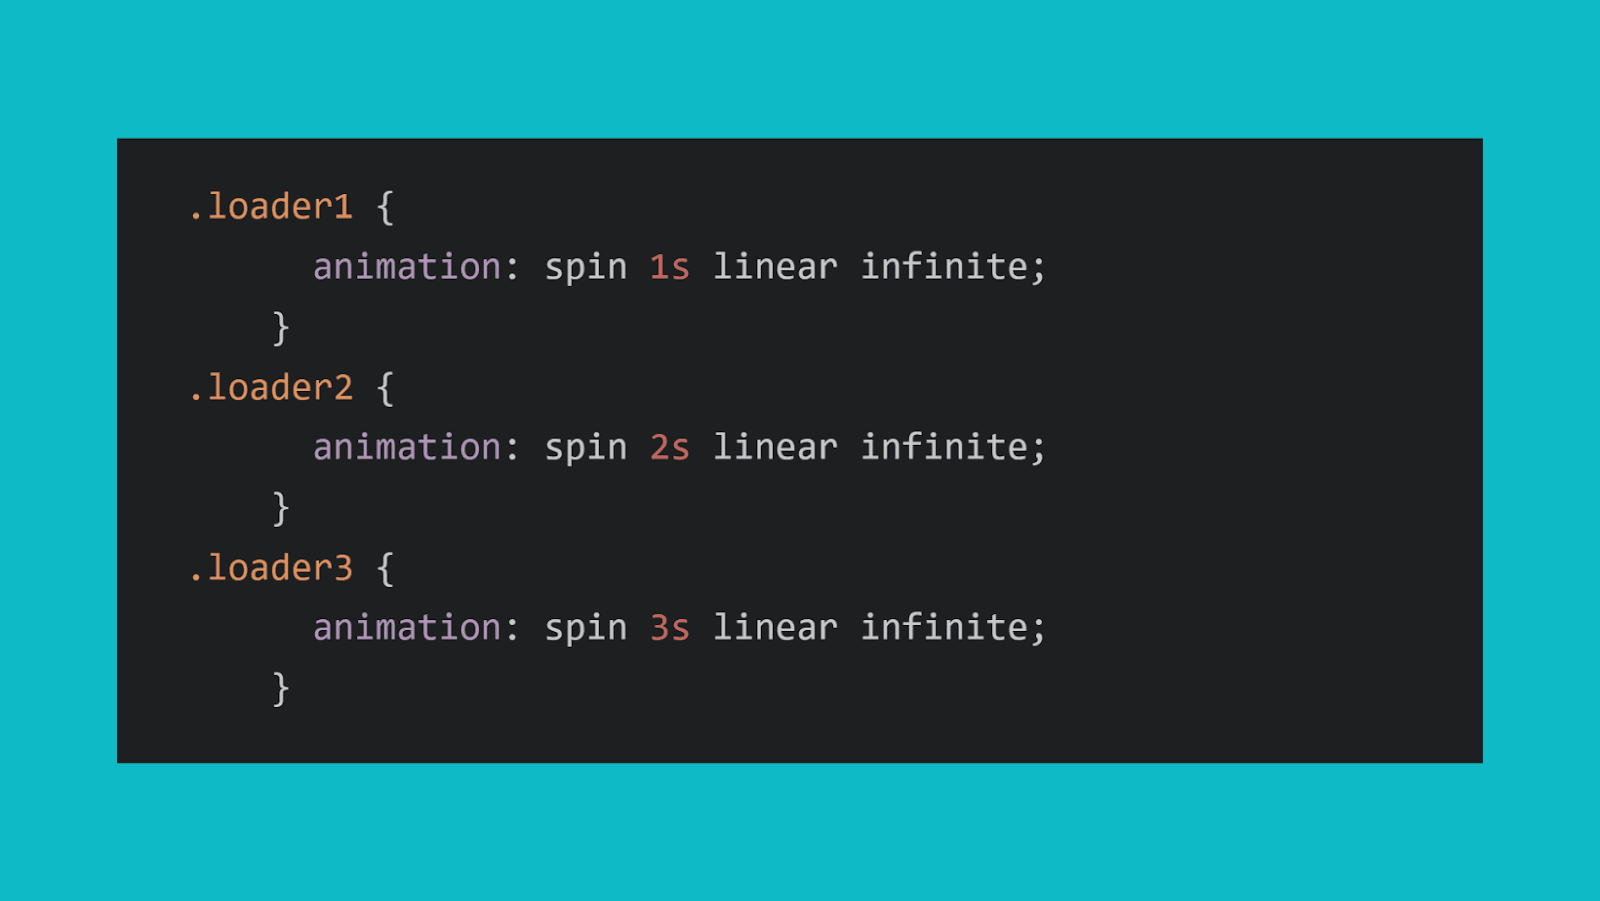 Spinning loaders animation demonstrating varying durations from 1 to 5 seconds